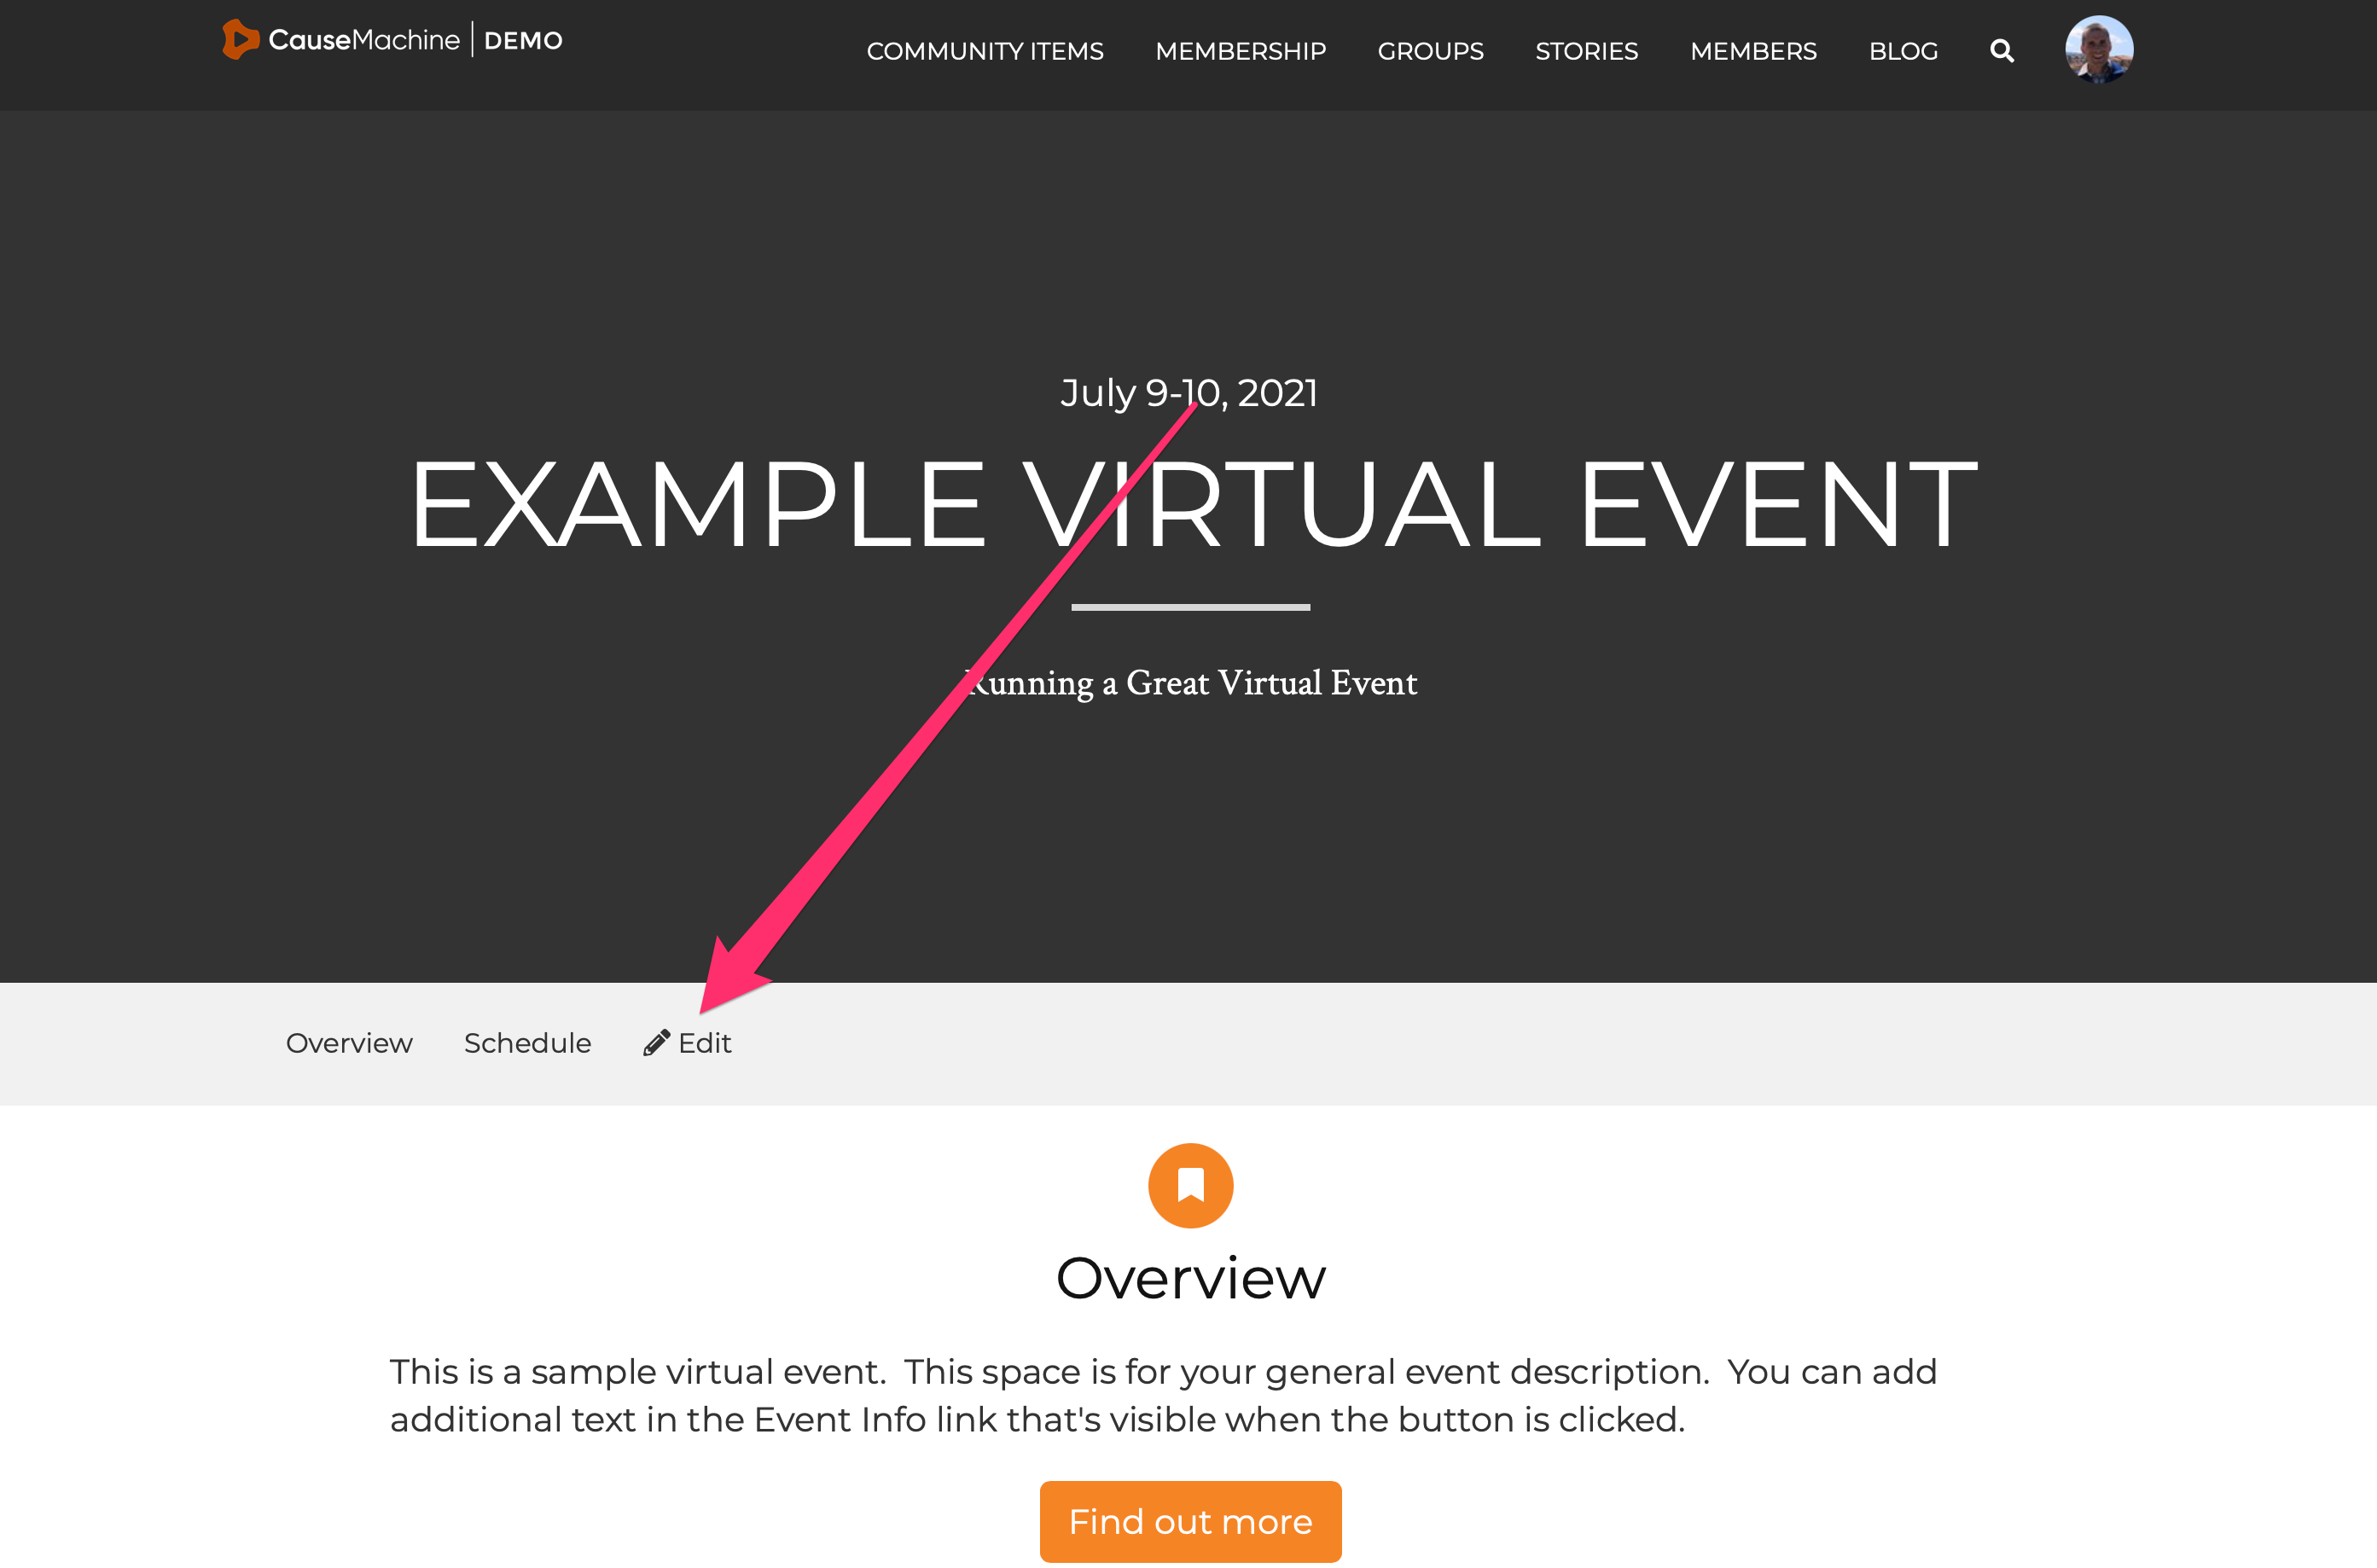 Example_Virtual_Event_-_July_9-10__2021.png